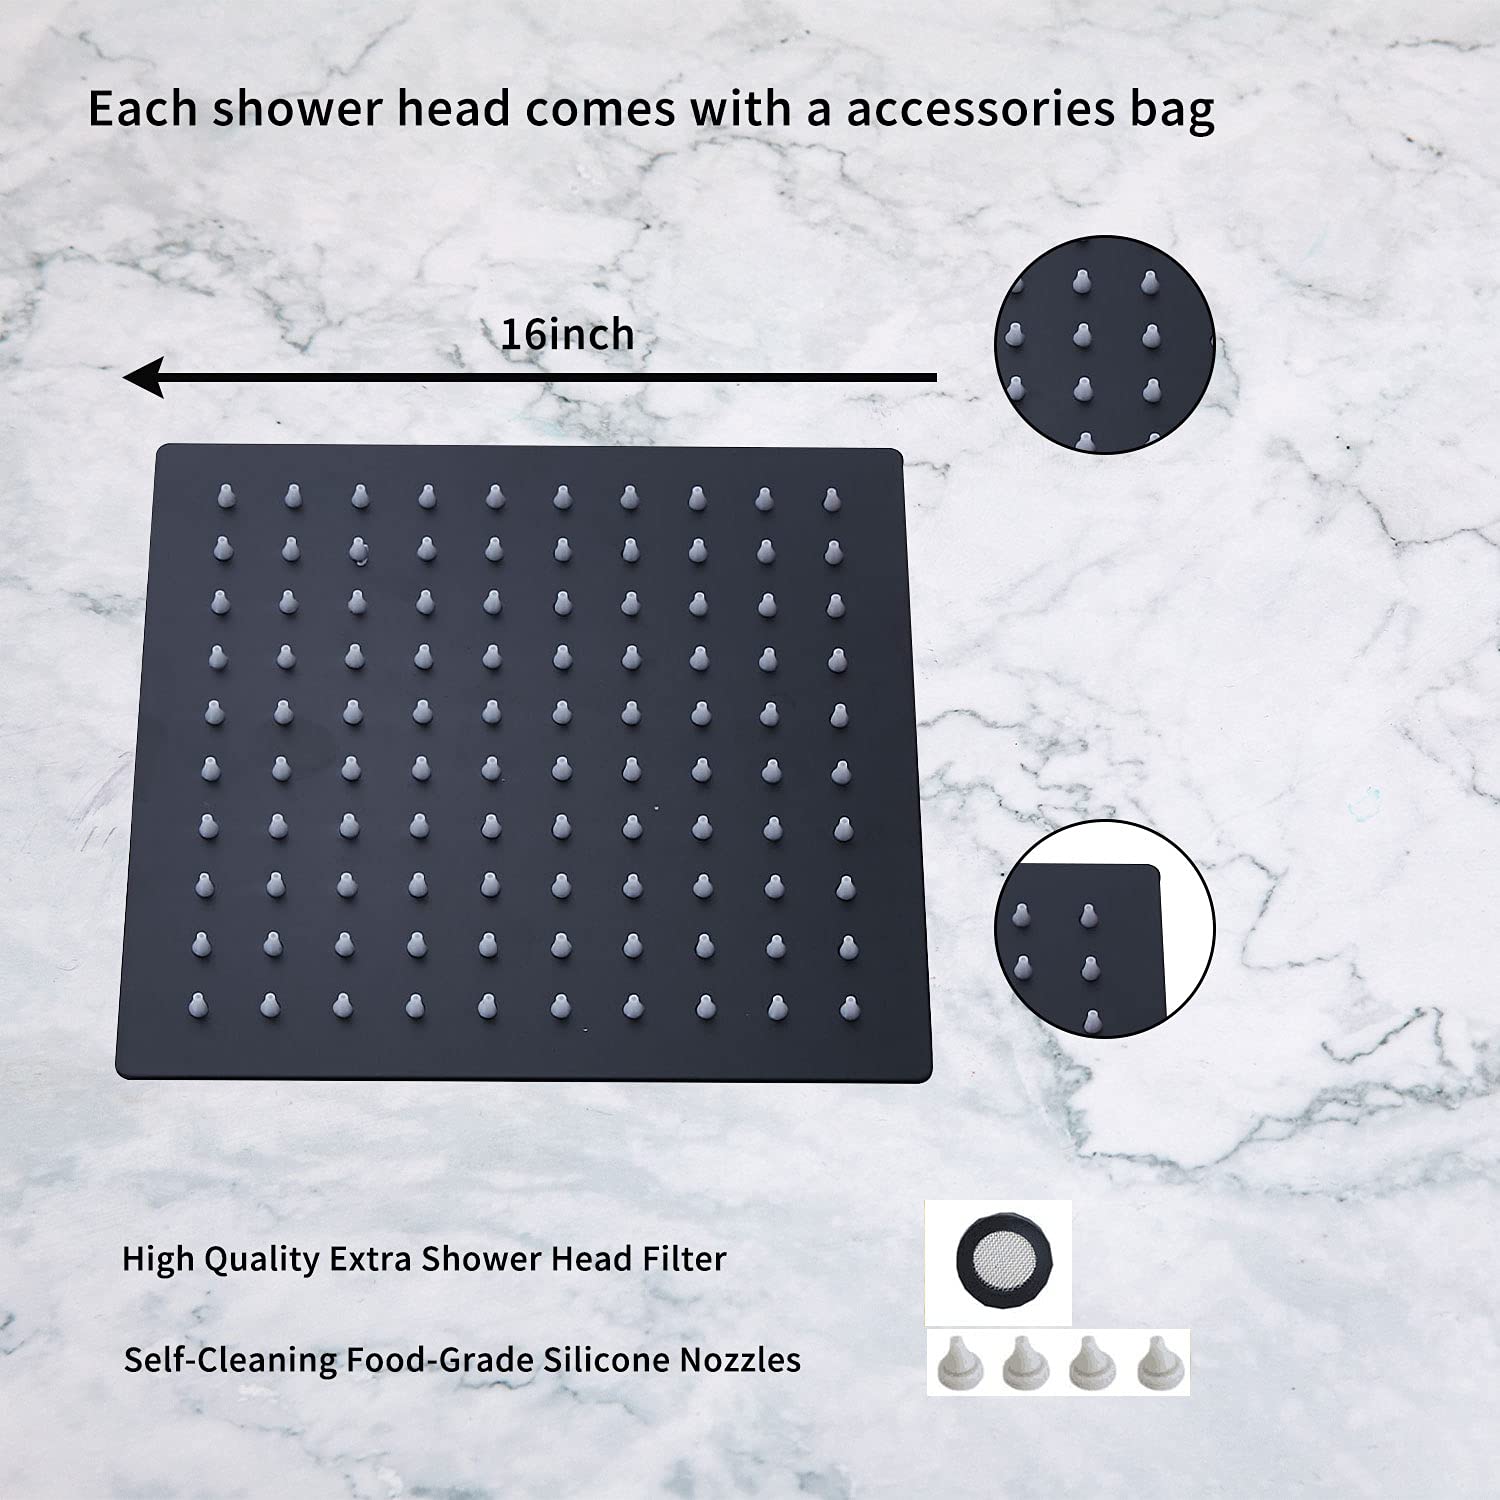 High Pressure Shower Head GGStudy Square Black Shower Head 16 Inch Large Stainless Steel Shower Heads Ultra Thin Rainfall Bath Shower 1/2 Connection